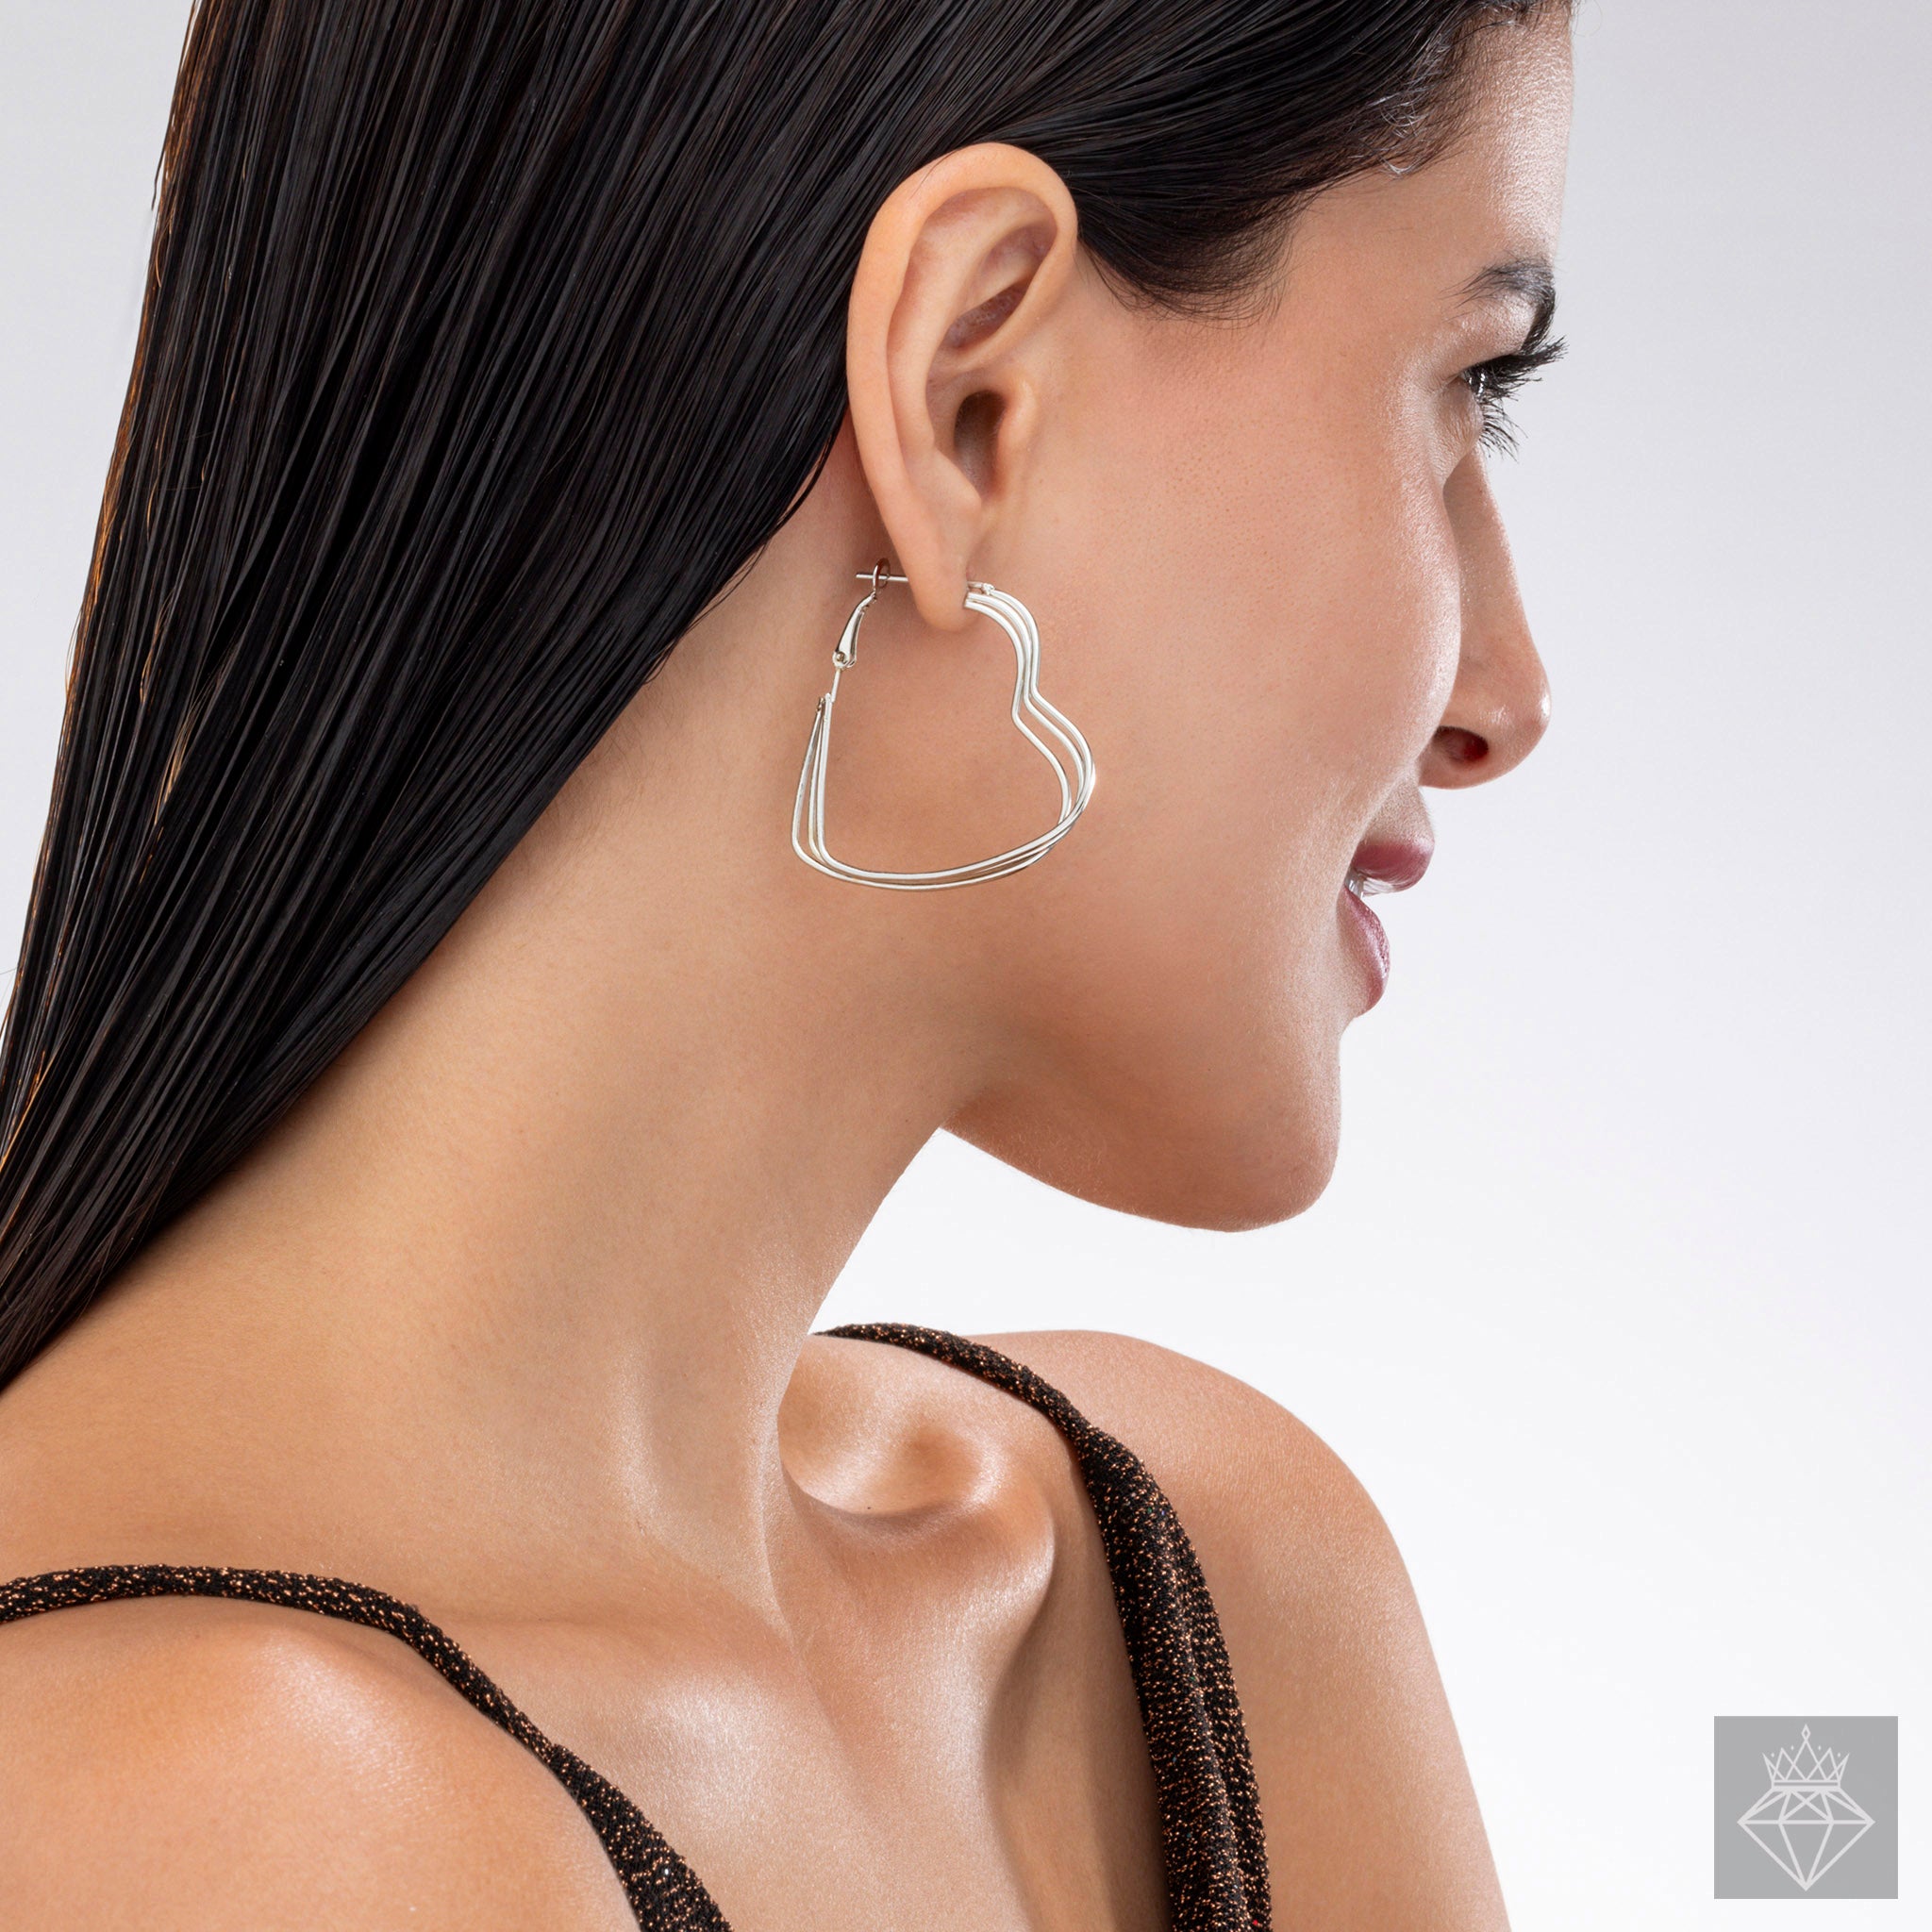 PRAO Silver Hearty Hoops: Embrace the Heart of Style